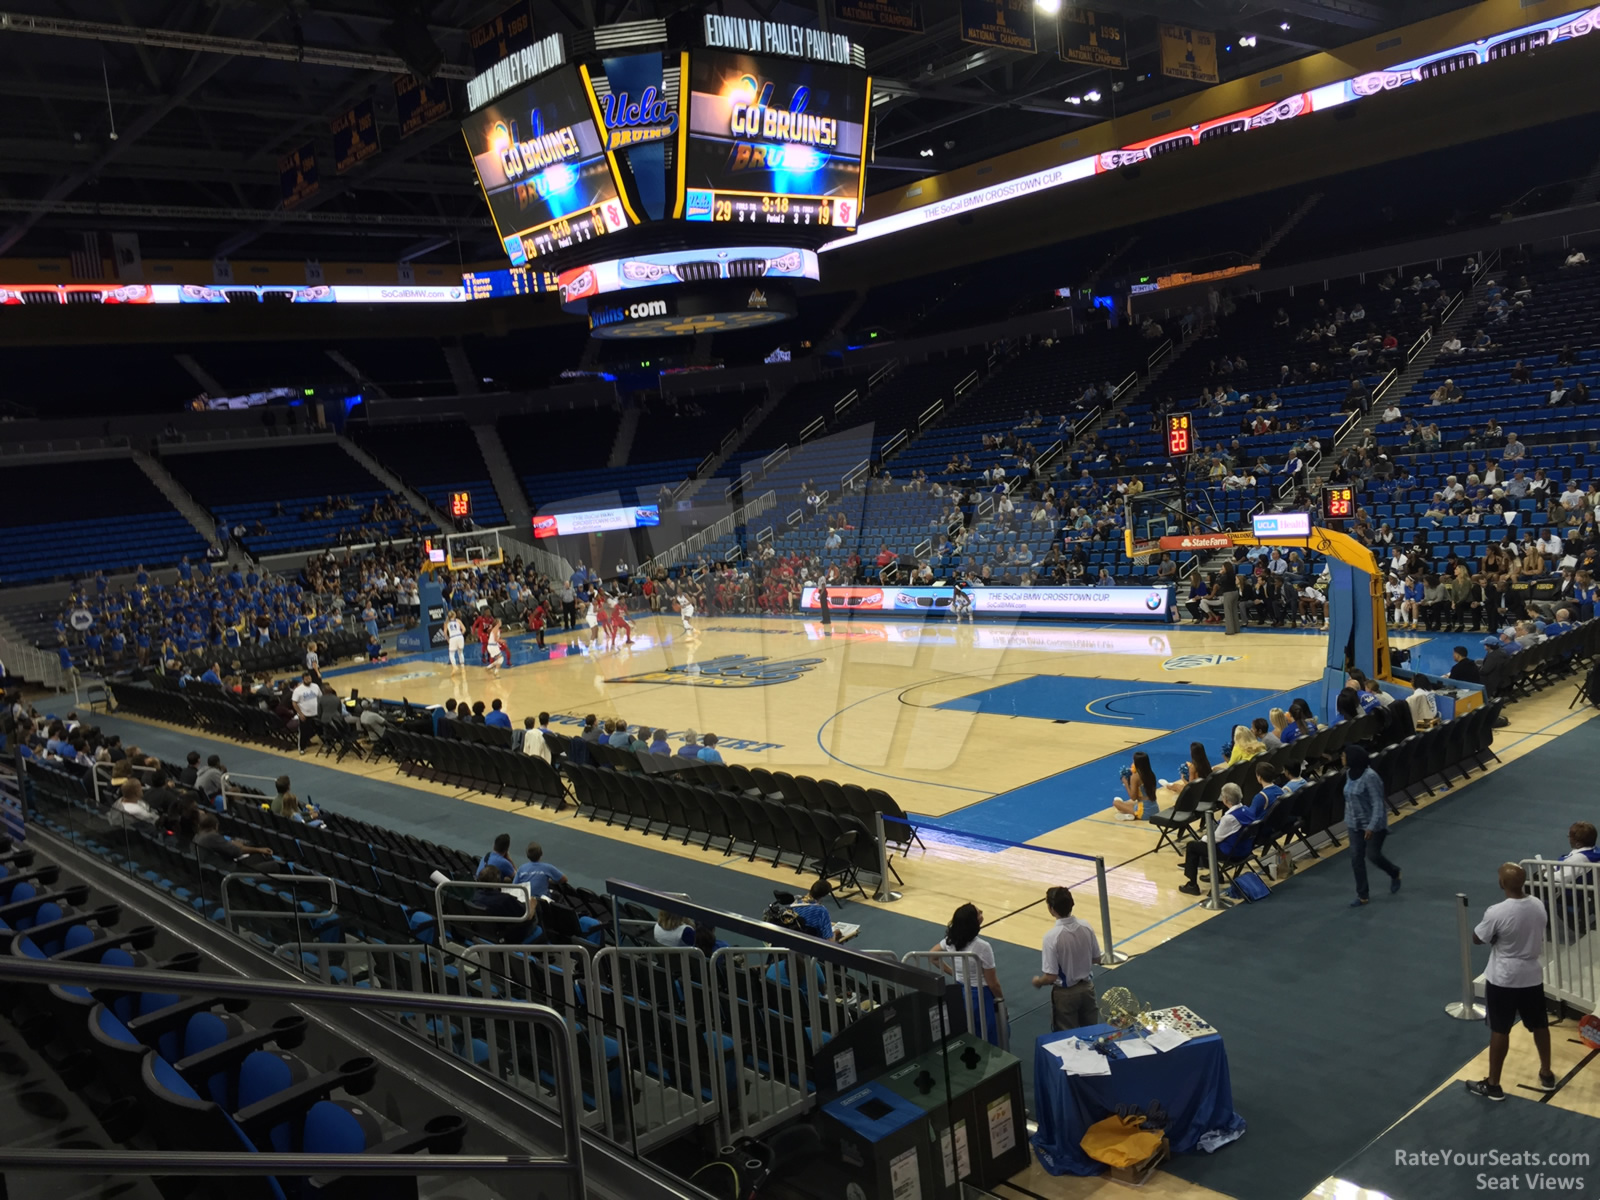 section 112, row 3 seat view  - pauley pavilion